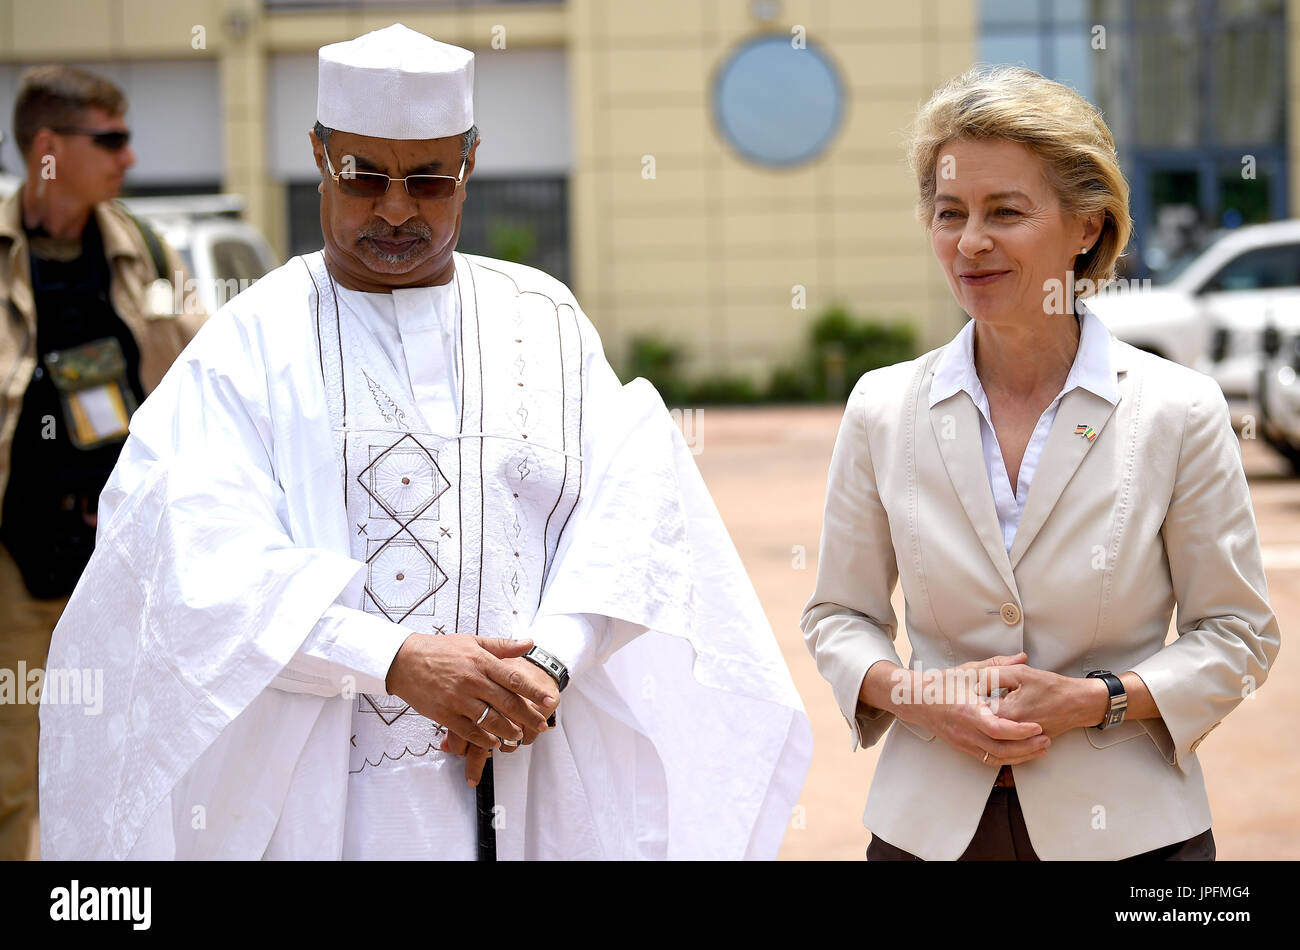 Bamako, Mali. 01st Aug, 2017. German Defence Minister Ursula von der Leyen (L) pictured with the deputy commander of the MINSUMA (United Nations Multidimensional Integrated Stabilization Mission in Mali) forces, Mahamat Saleh Annadif, at the MINUSMA headquarters in Bamako, Mali, 01 August 2017. Photo: Britta Pedersen/dpa/Alamy Live News Stock Photo